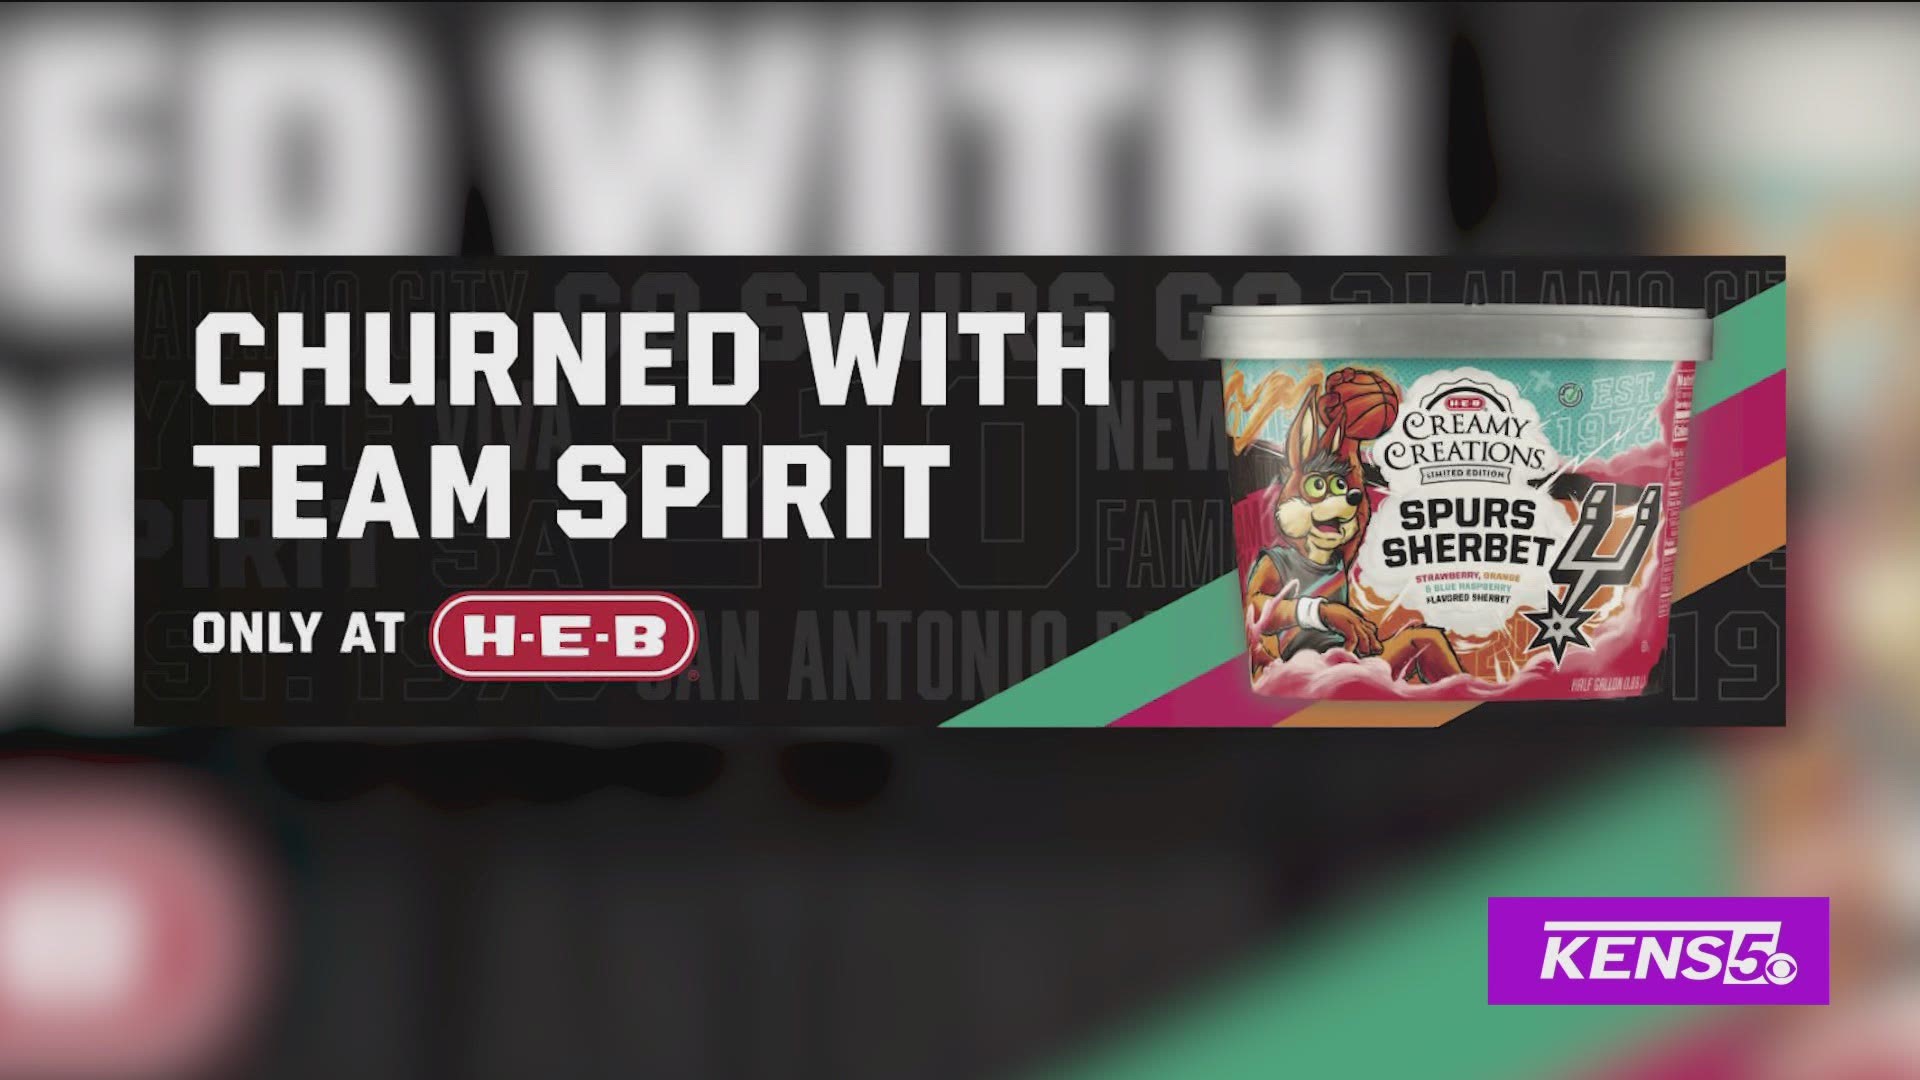 Spurs Sherbet is here and Hidden Valley Ranch is going vegan? Catch what you missed in Let's Eat.